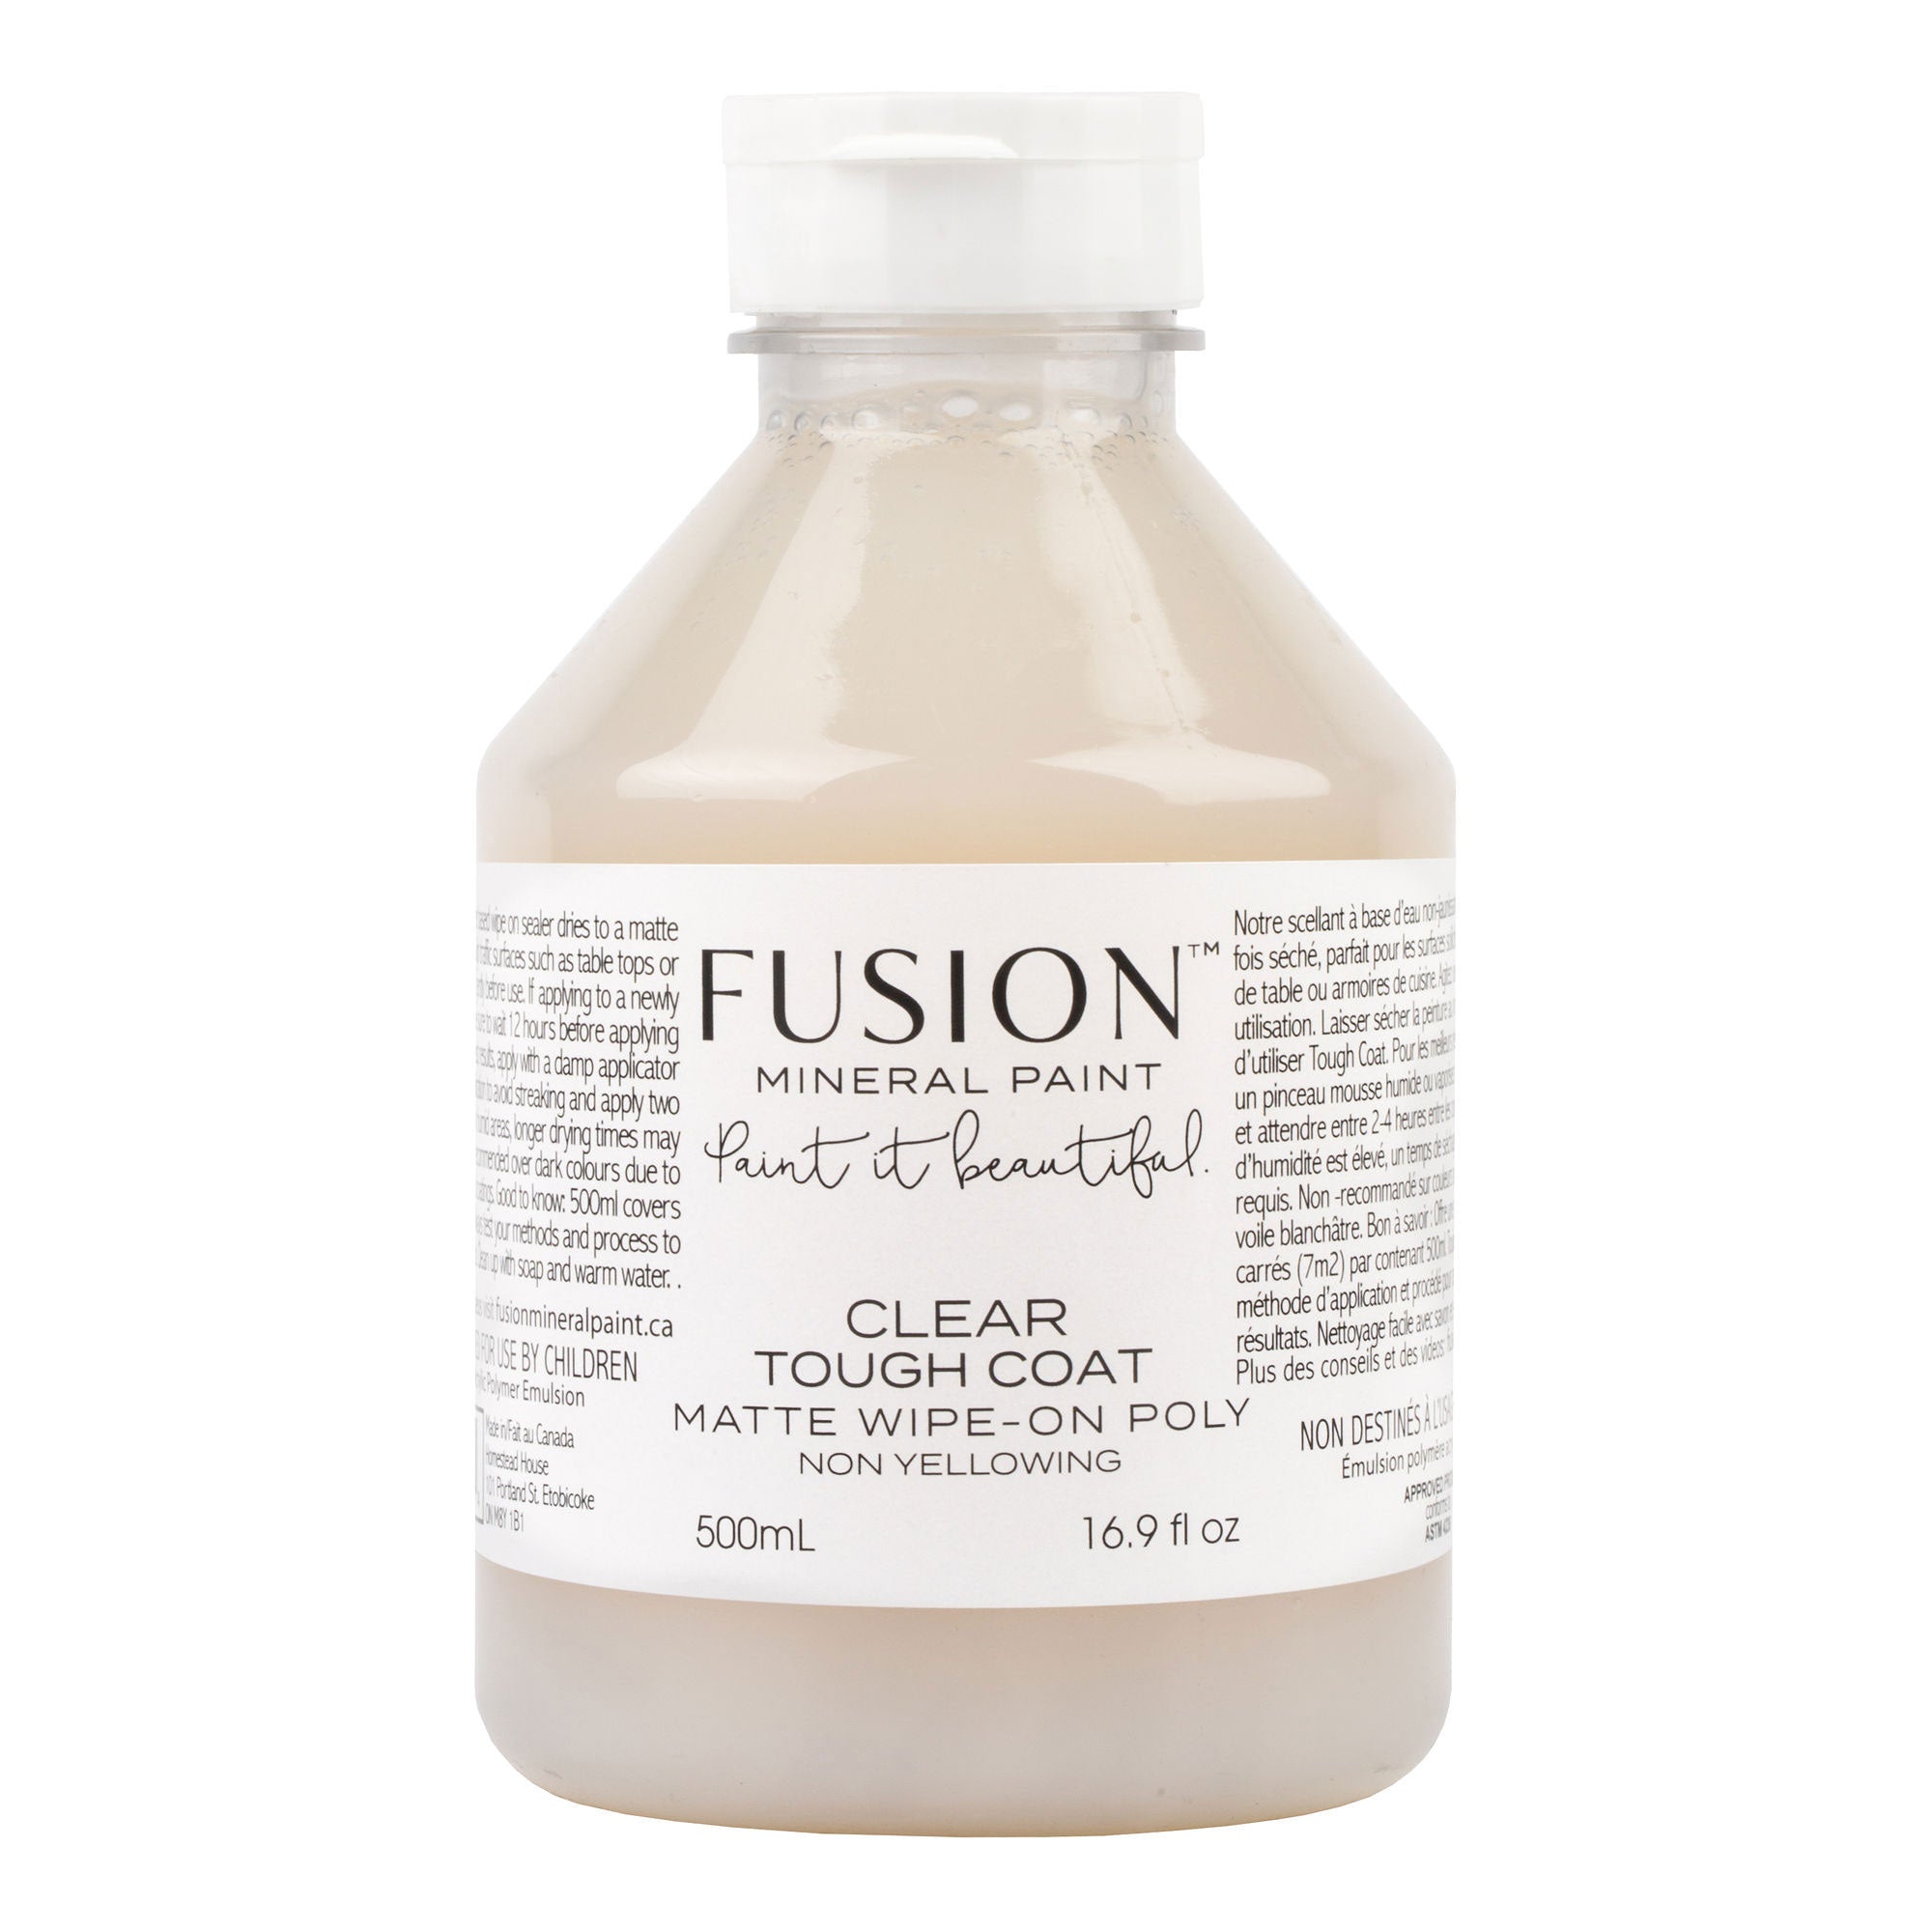 Fusion Mineral Paint - Clear Tough Coat Matte Wipe-On Poly